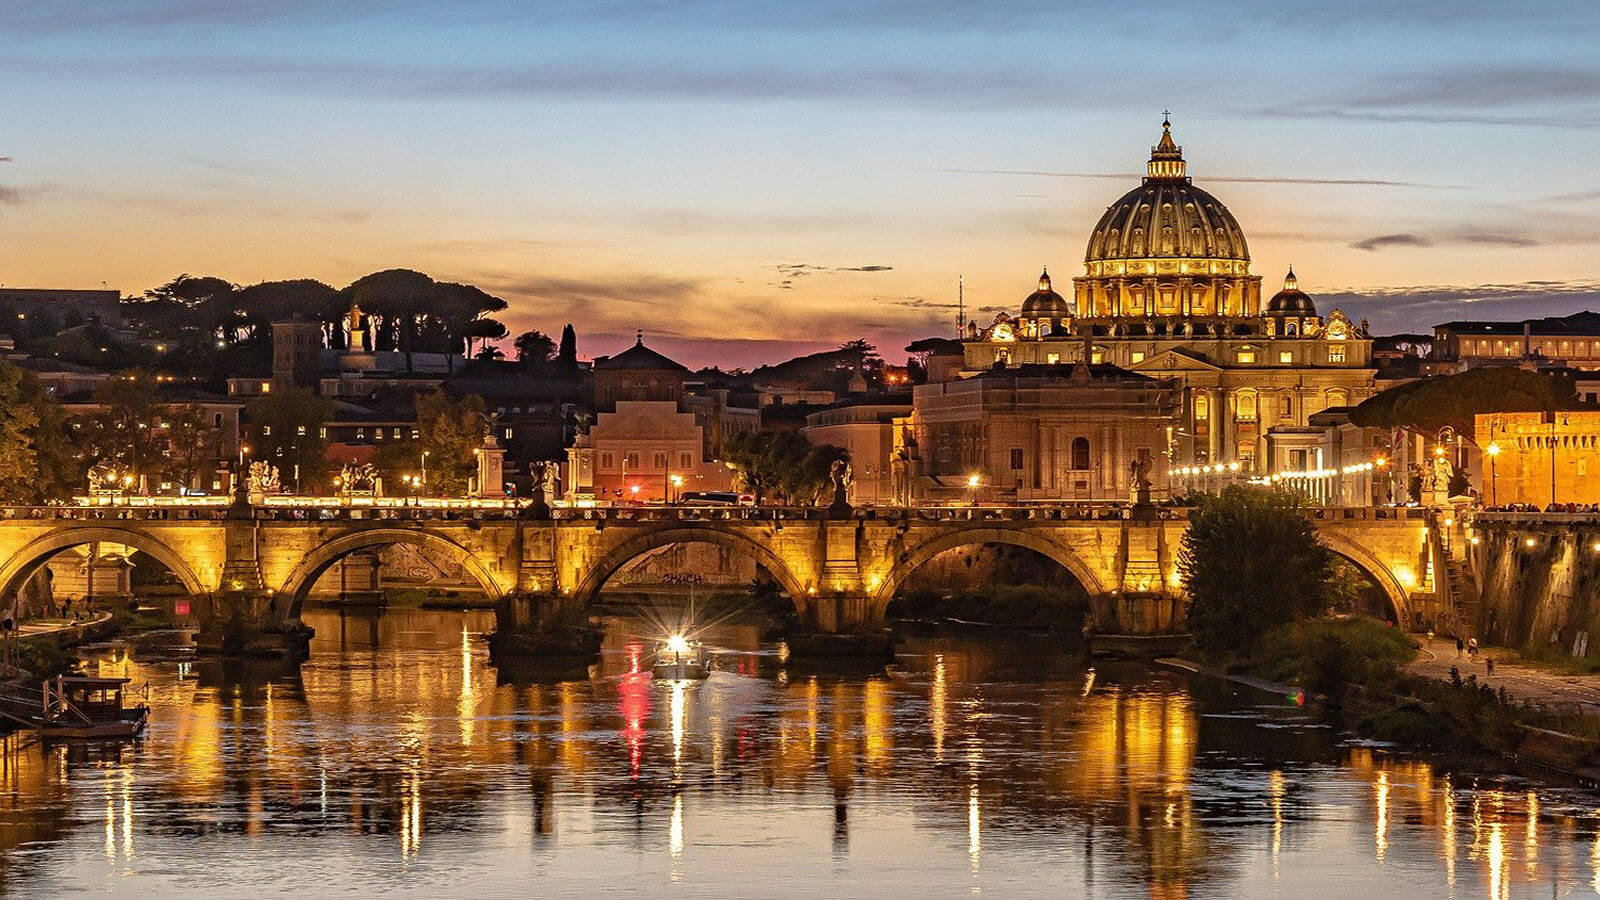 The city of Rome at dusk with the River Tiber and ancient Roman Forum